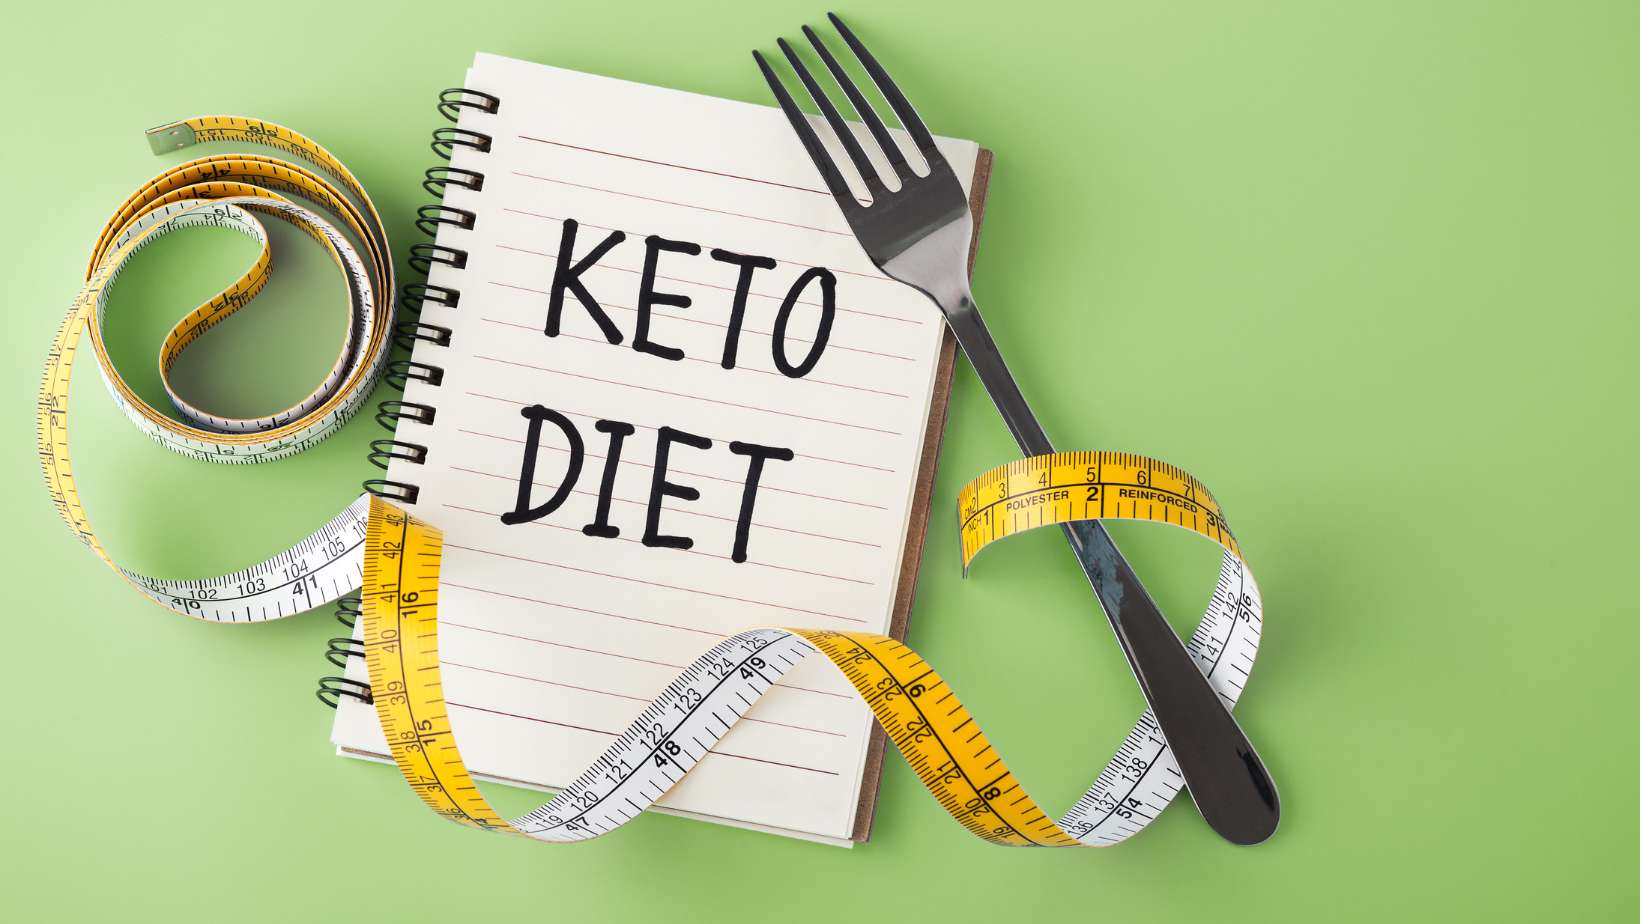 Keto diet word on notebook with measuring tape and fork on green background, top view